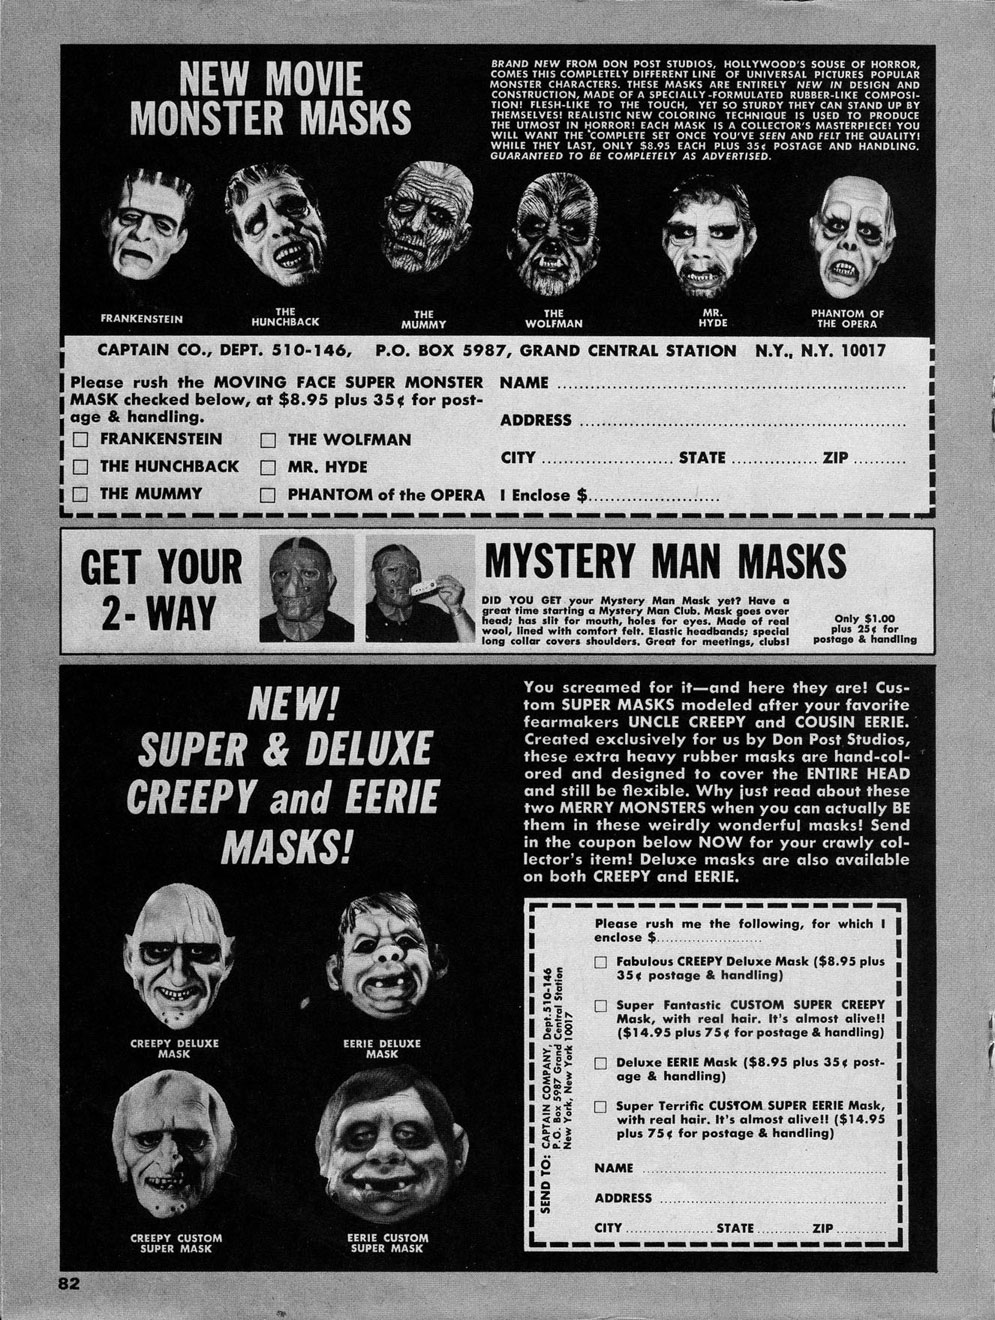 Don Post Mask Ads - Famous Monsters #46 | Blood Curdling Blog of ...